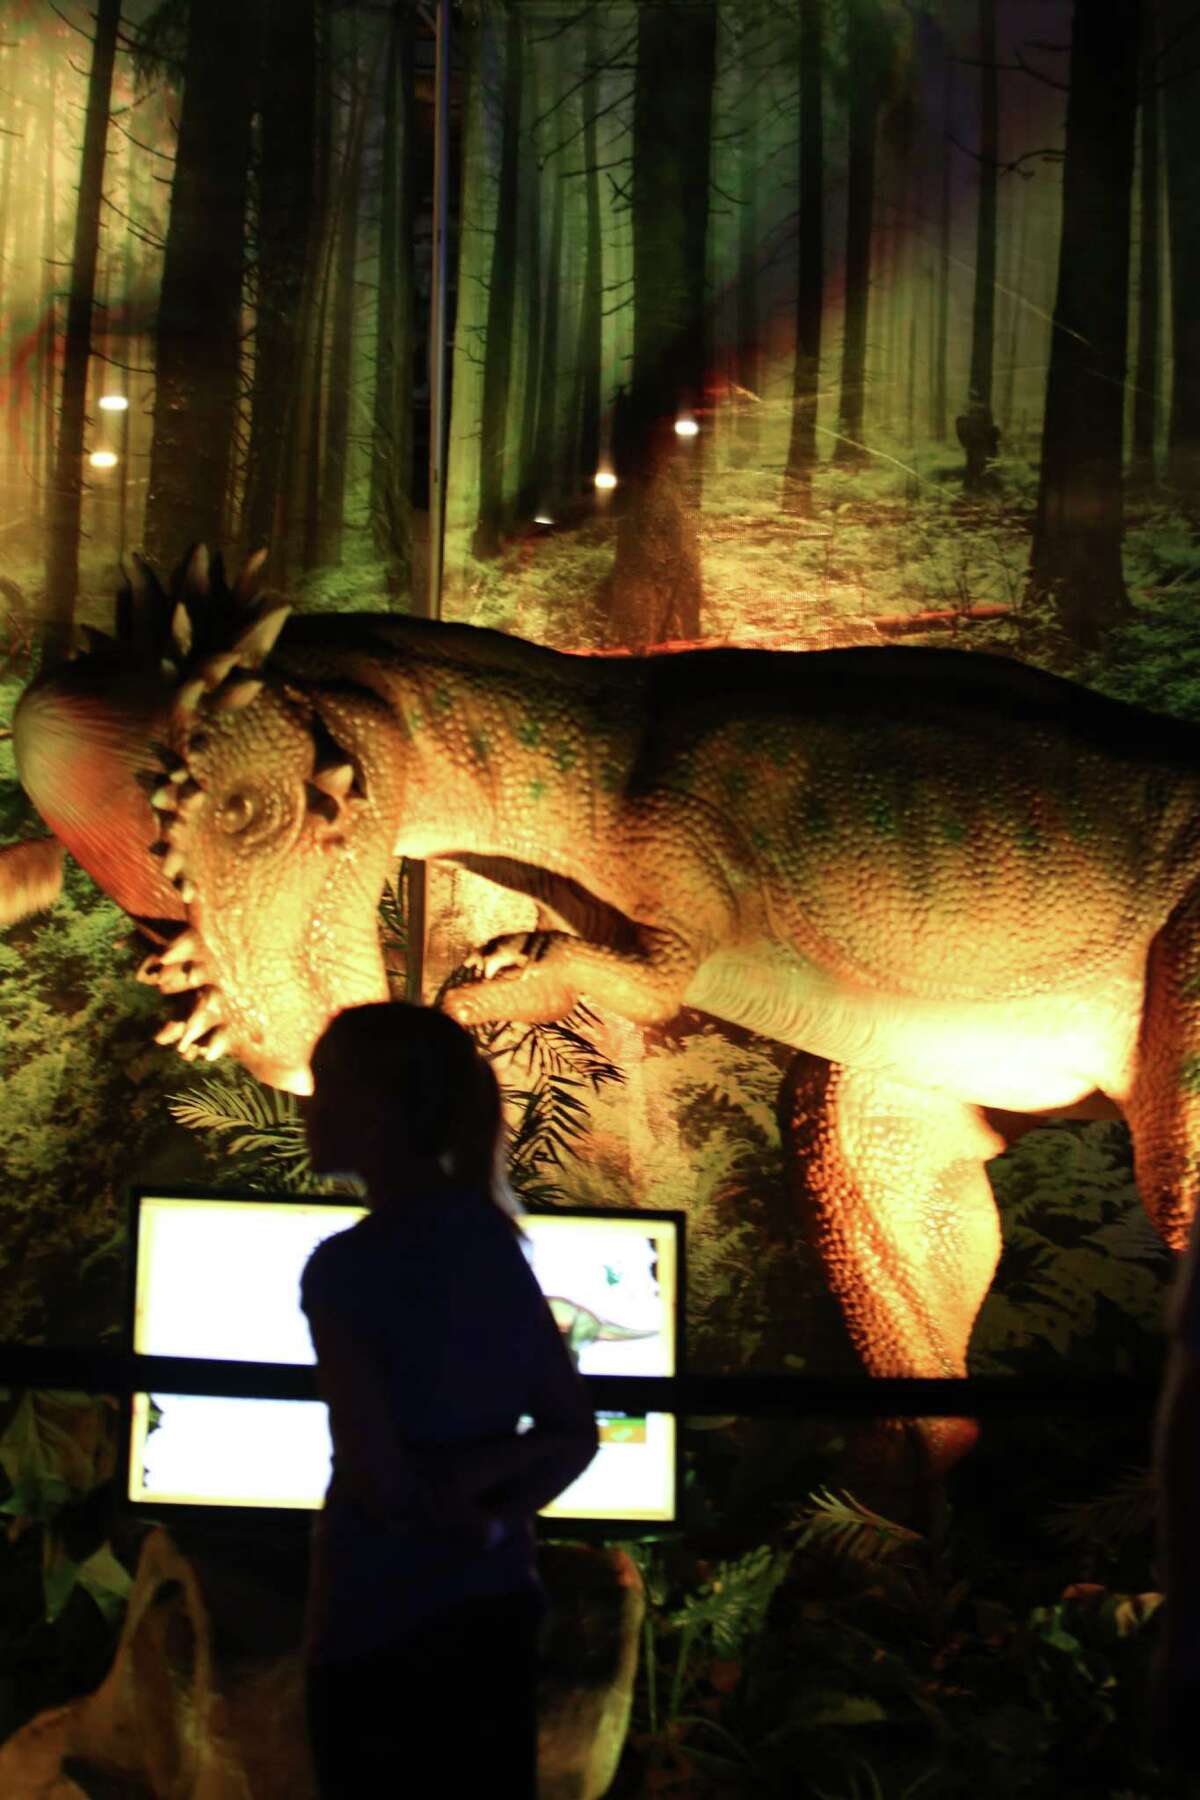 Handson dinosaur exhibit coming to Ford Park